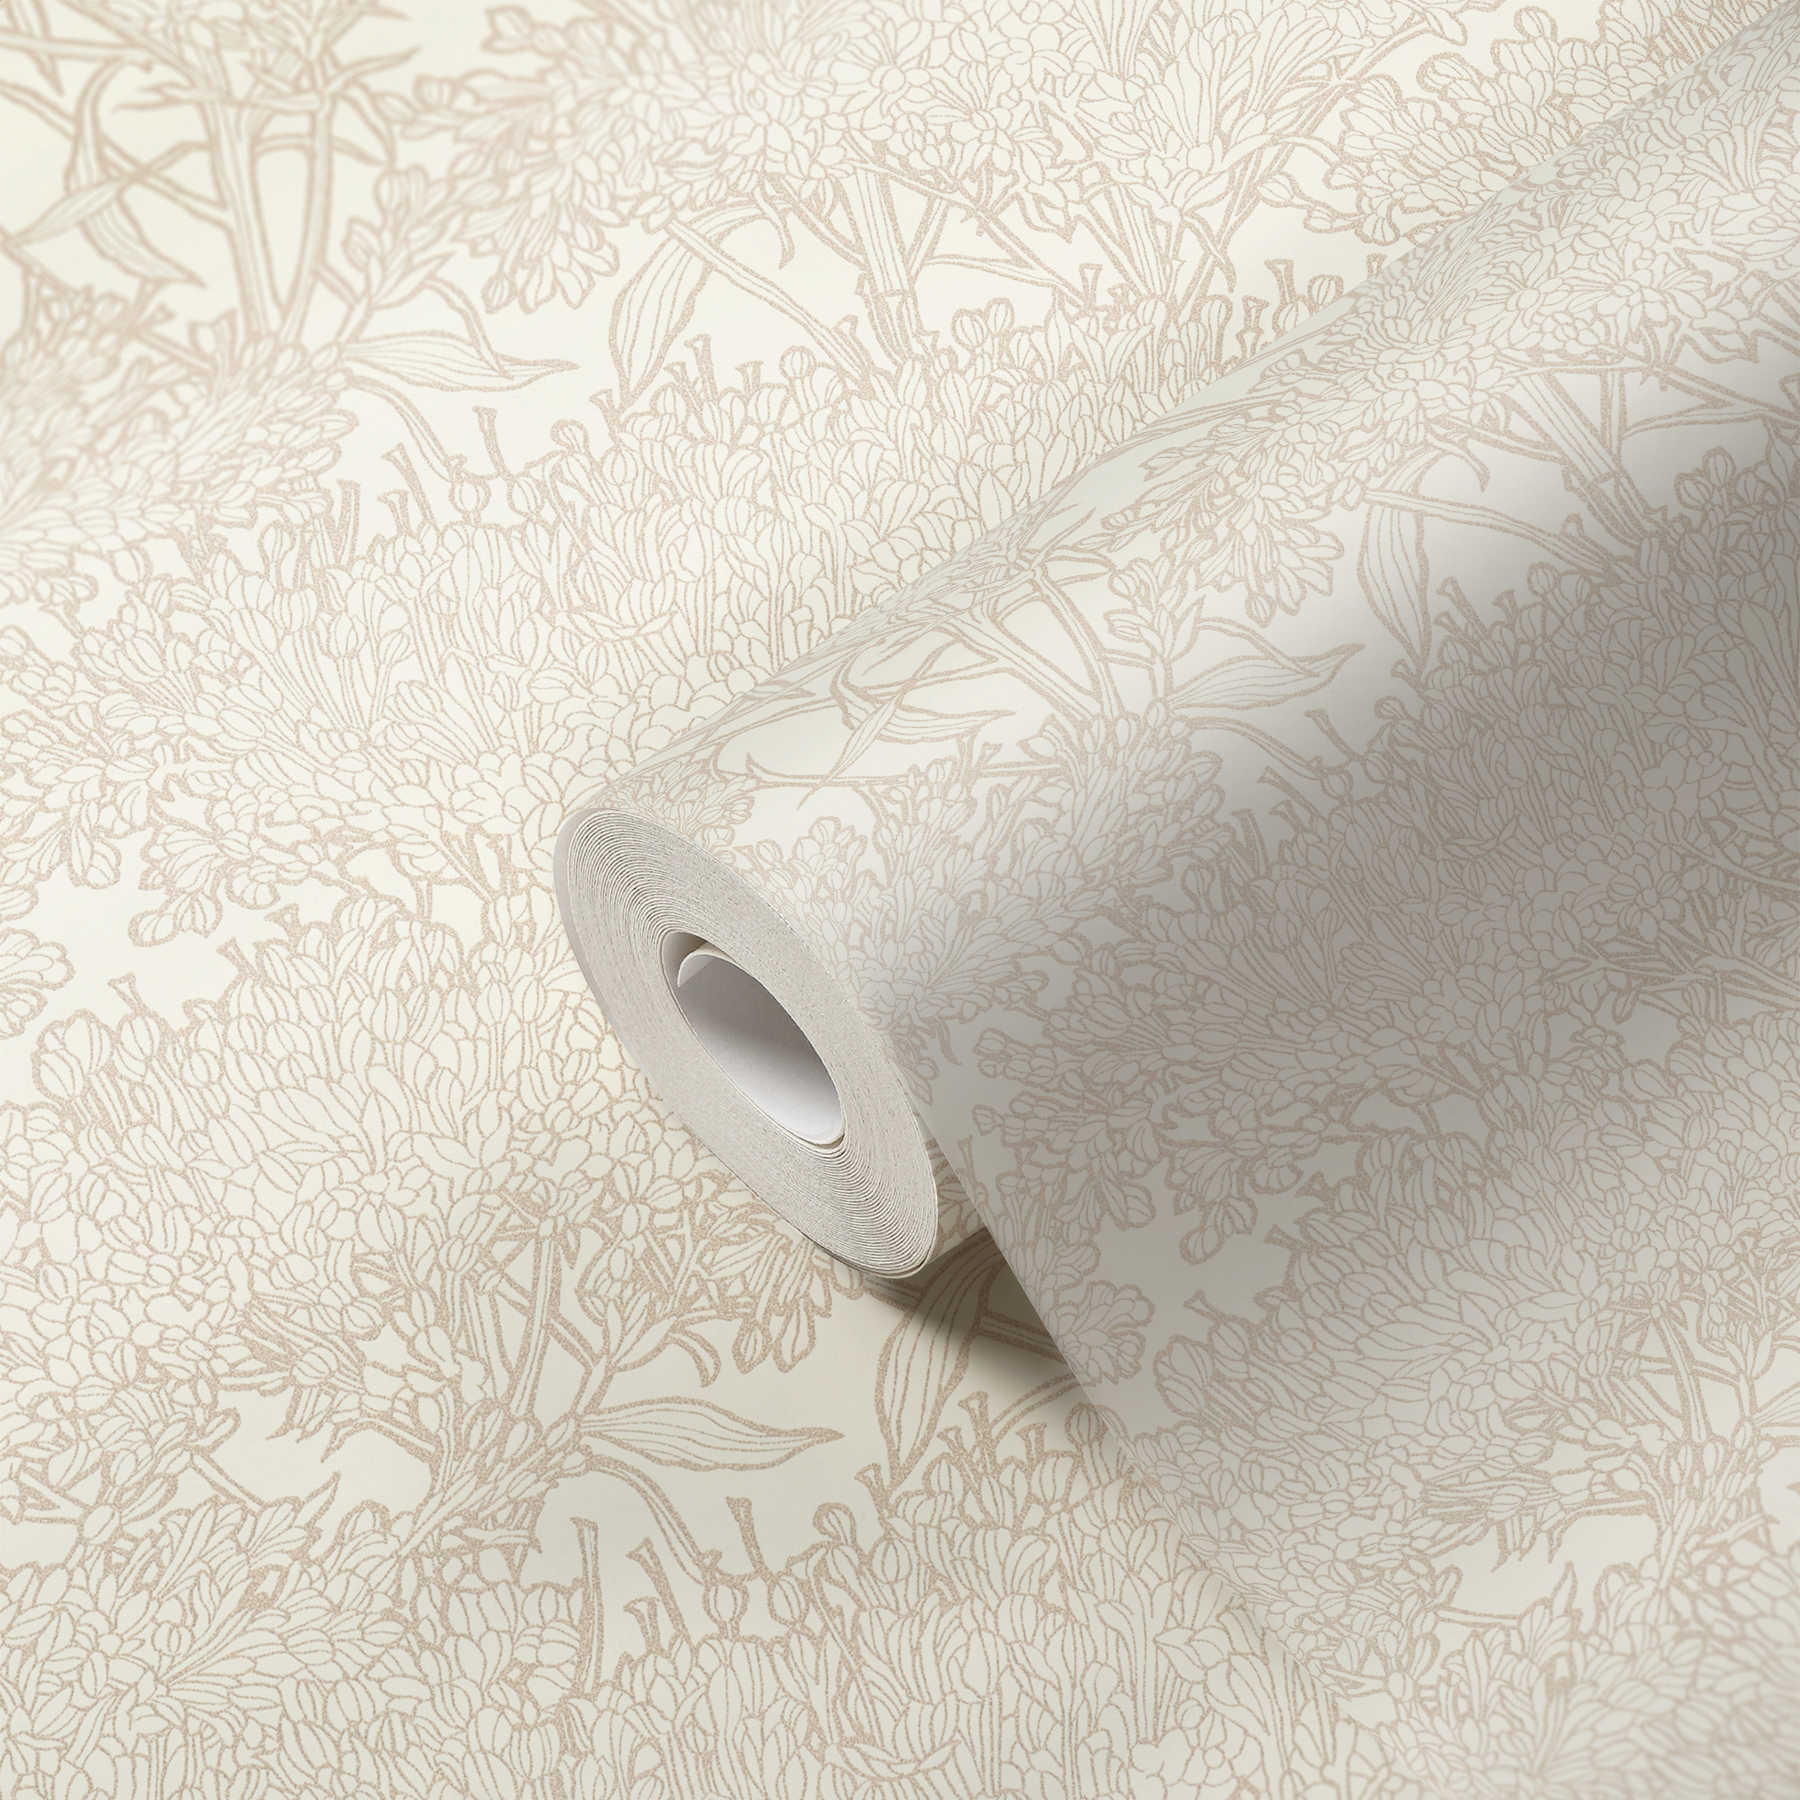             Wallpaper floral pattern with golden contours - cream, gold, grey
        